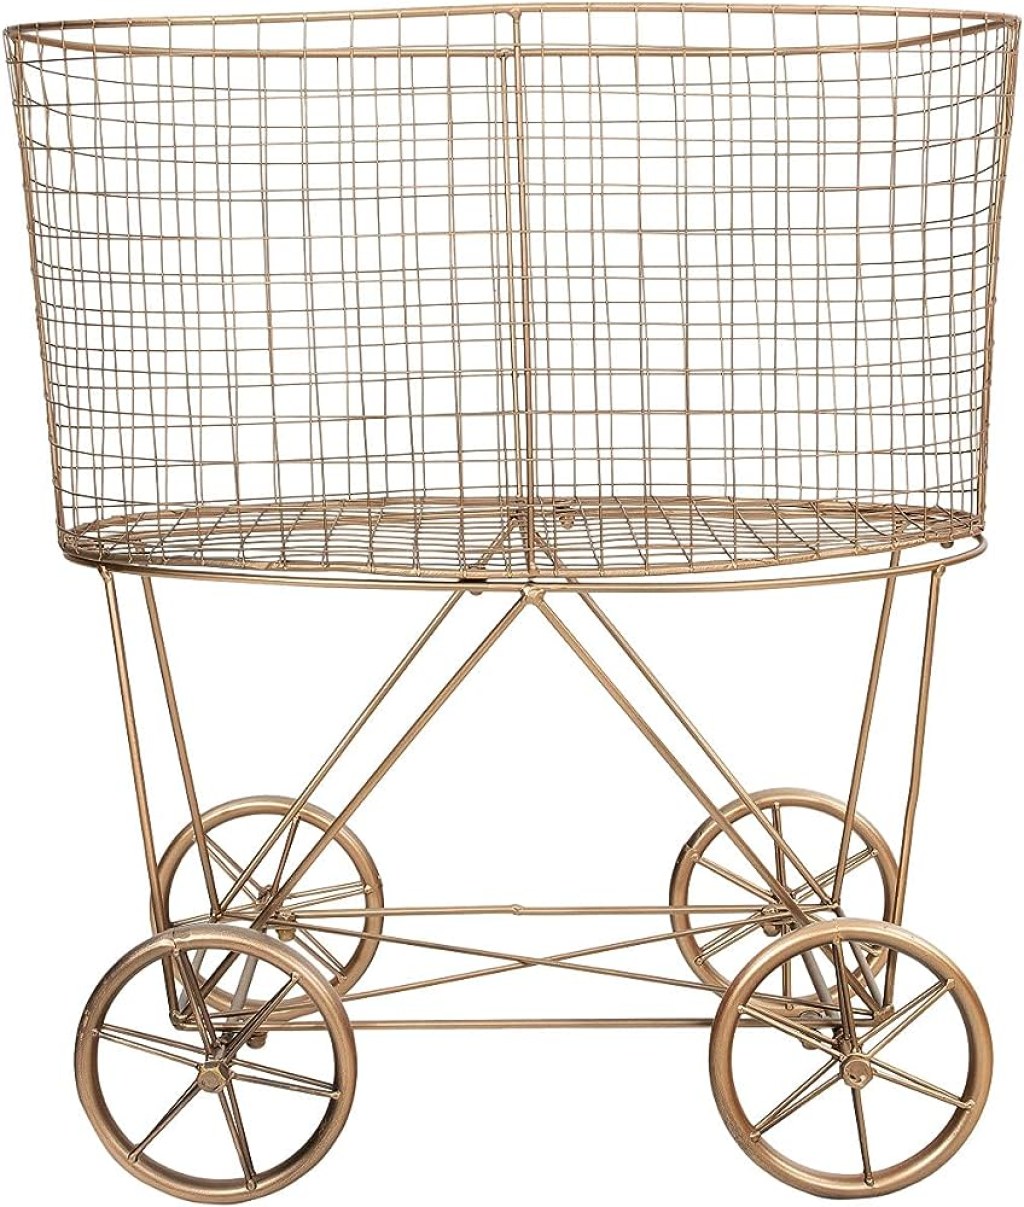 creative decorative laundry basket - Creative Co-op Vintage Style Metal Laundry Basket With Wheels Wood Copper